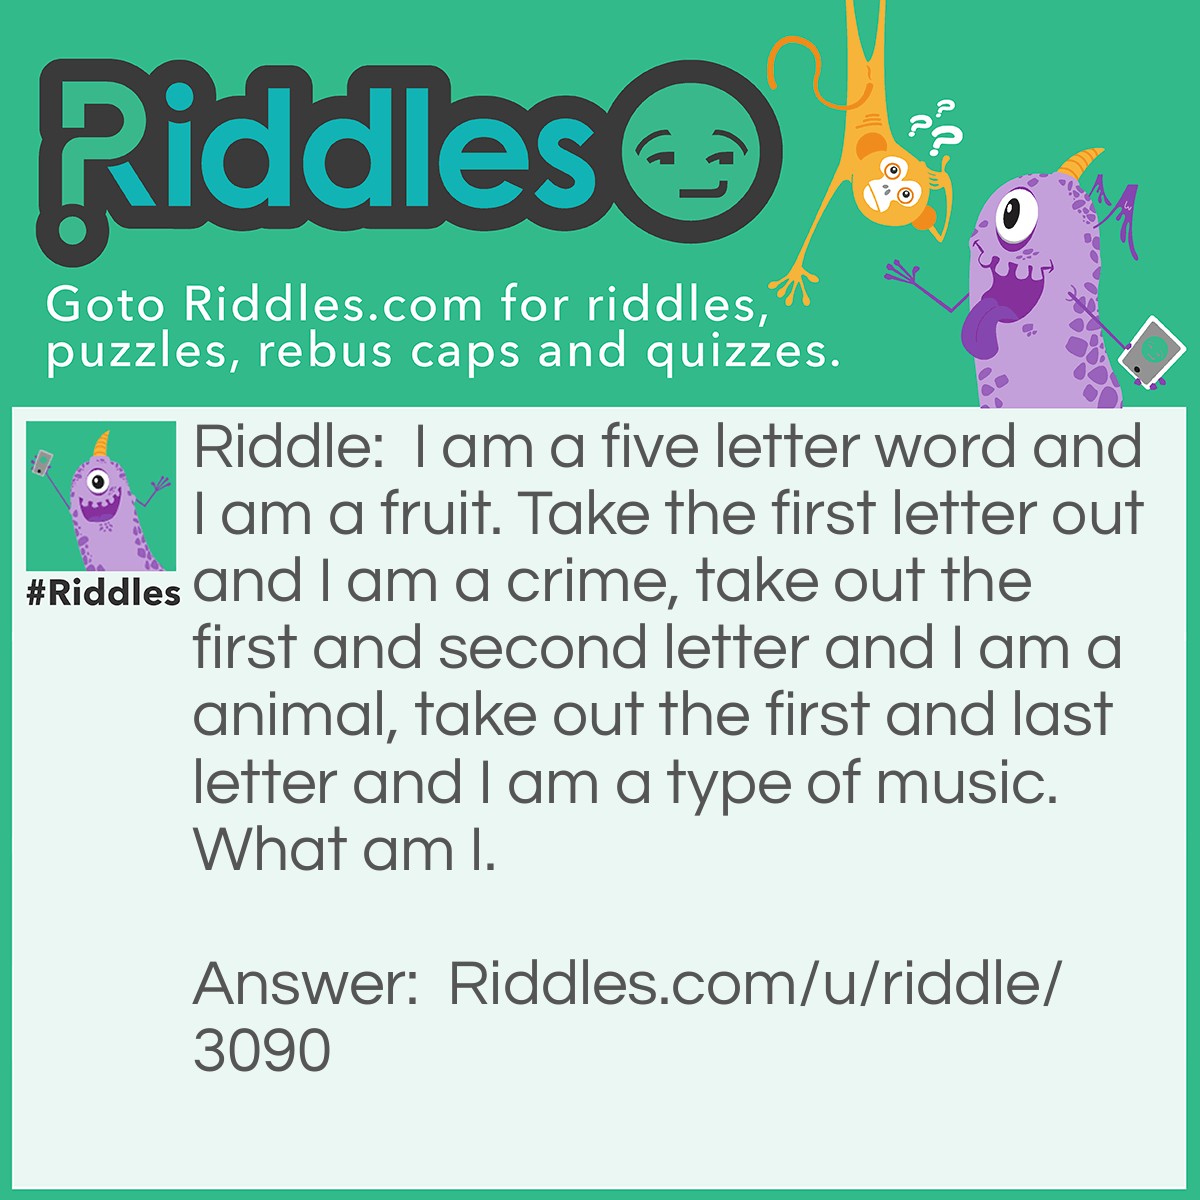 Riddle: I am a five letter word and I am a fruit. Take the first letter out and I am a crime, take out the first and second letter and I am a animal, take out the first and last letter and I am a type of music. What am I. Answer: Grape cause if you take out the first letter it's rape, ape, rap.